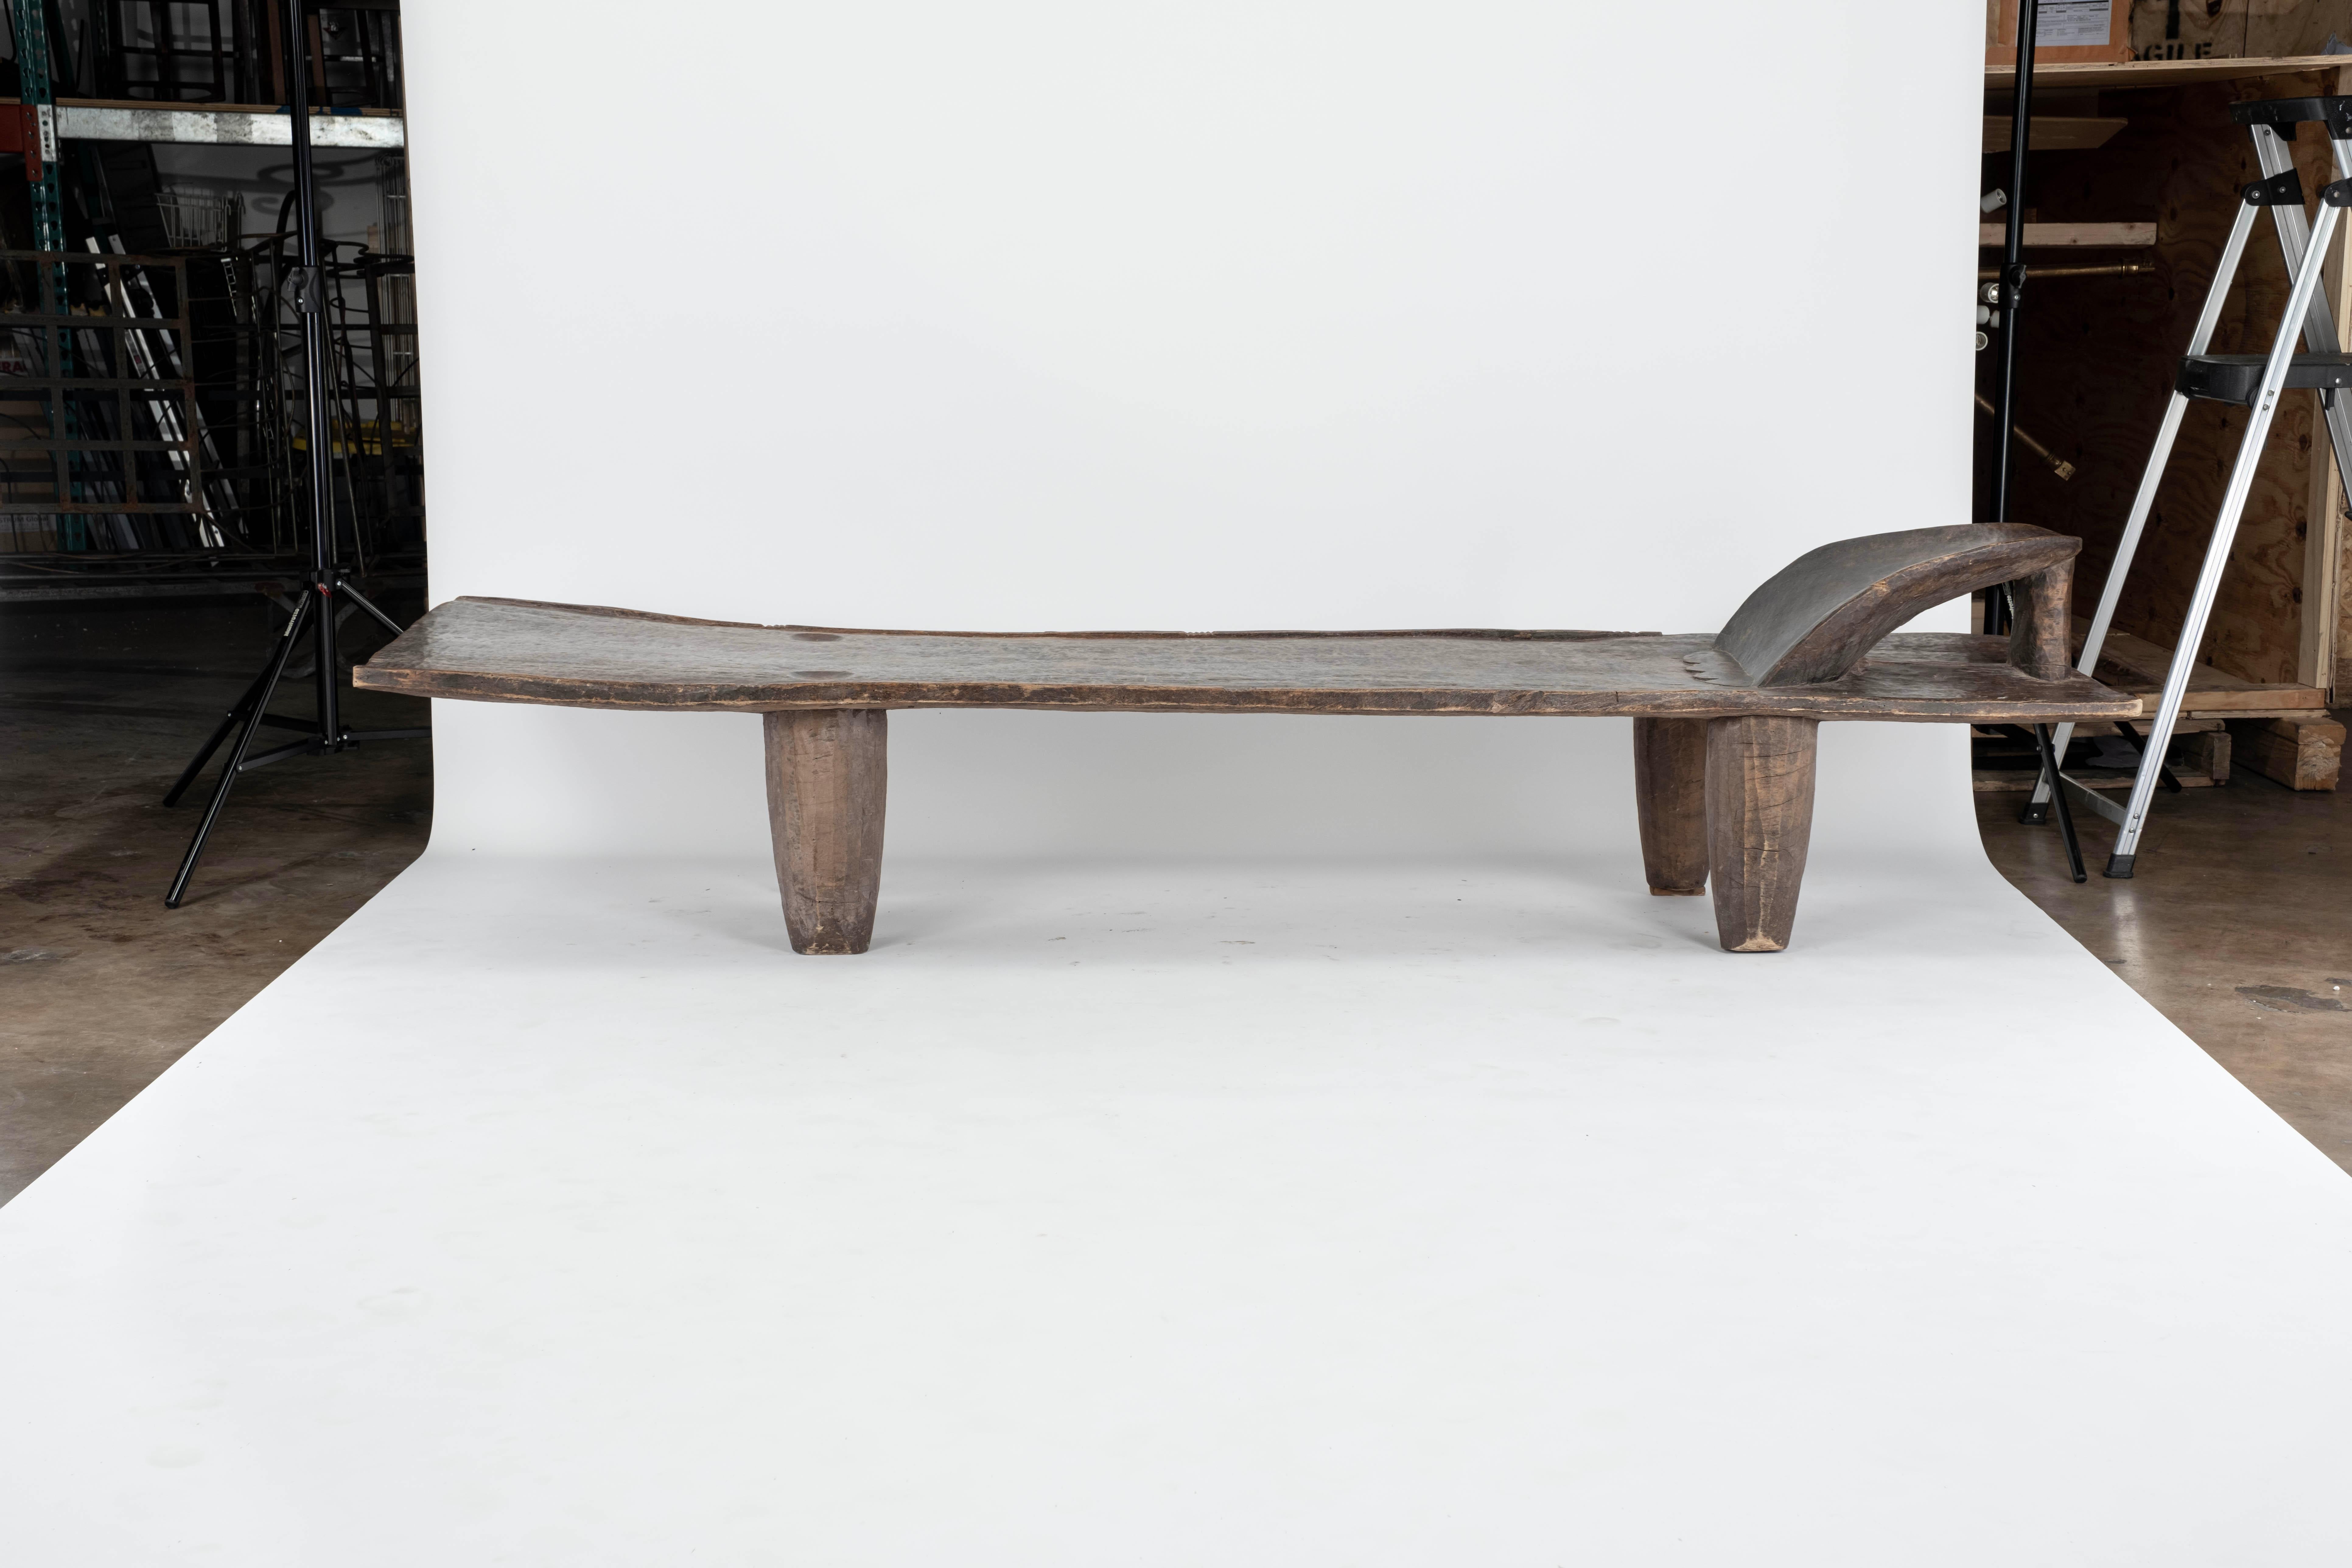 Hand carved by the Senufo tribes from a single block of iroko wood, native to the west coast of Africa. The wood is tough, dense and very durable. Shown with cone style legs and a raised headrest. Originally used as a bed that can also be used as a